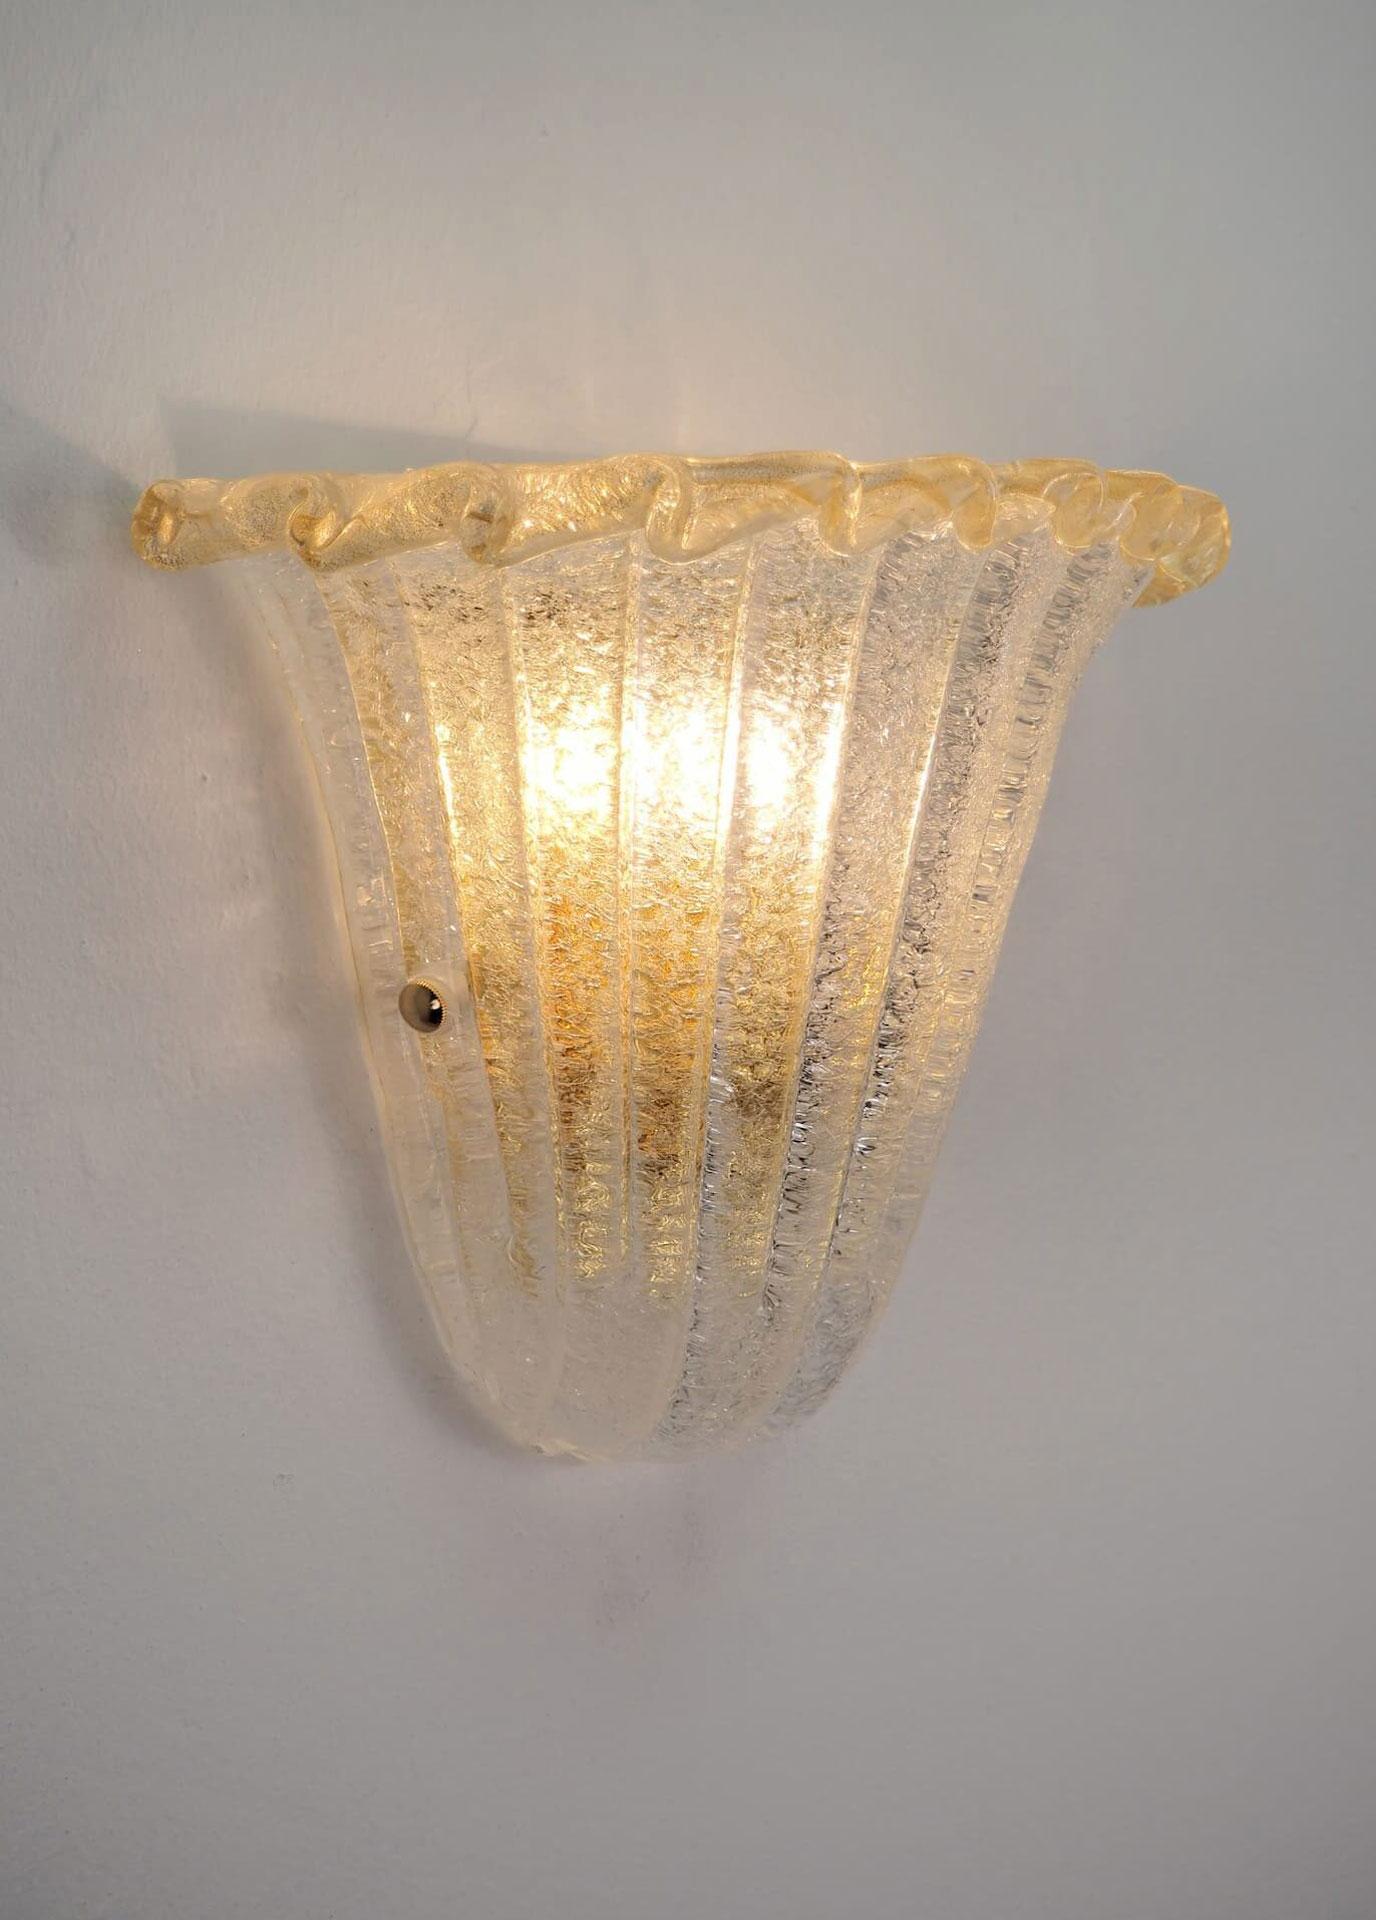 Italian wall light with a Murano glass shield hand blown in Graniglia technique to produce granular textured effect with gold flecks infused in the rim, mounted on gold plated finish frame / Made in Italy
Measures: Height 10 inches, width 12 inches,